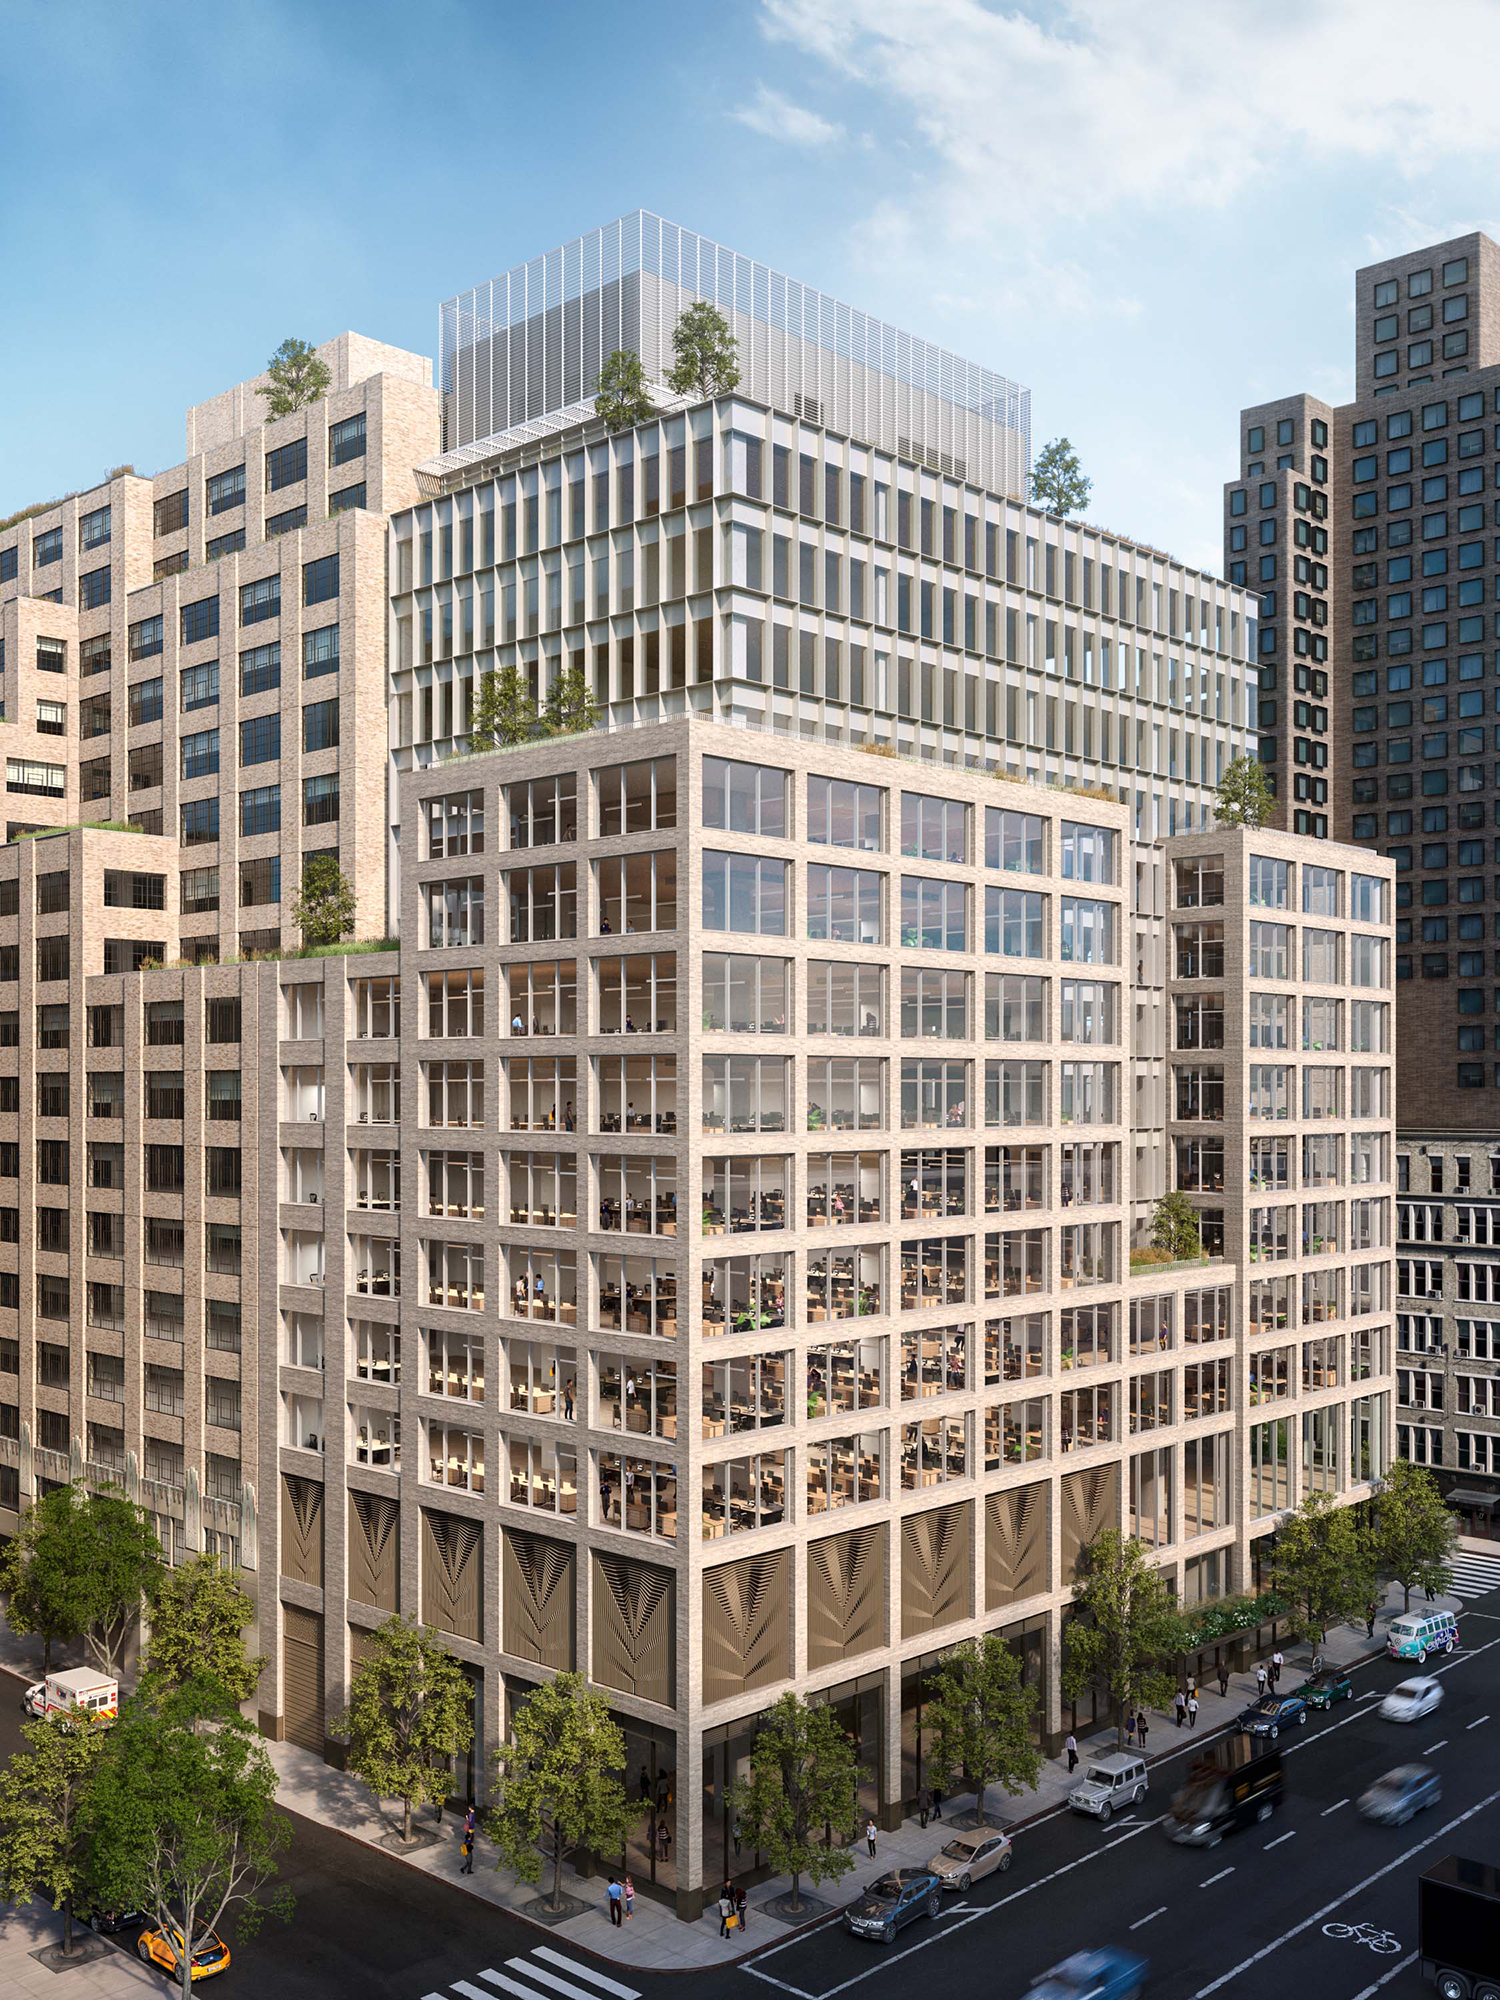 Rendering of 555 Greenwich Street - COOKFOX Architects